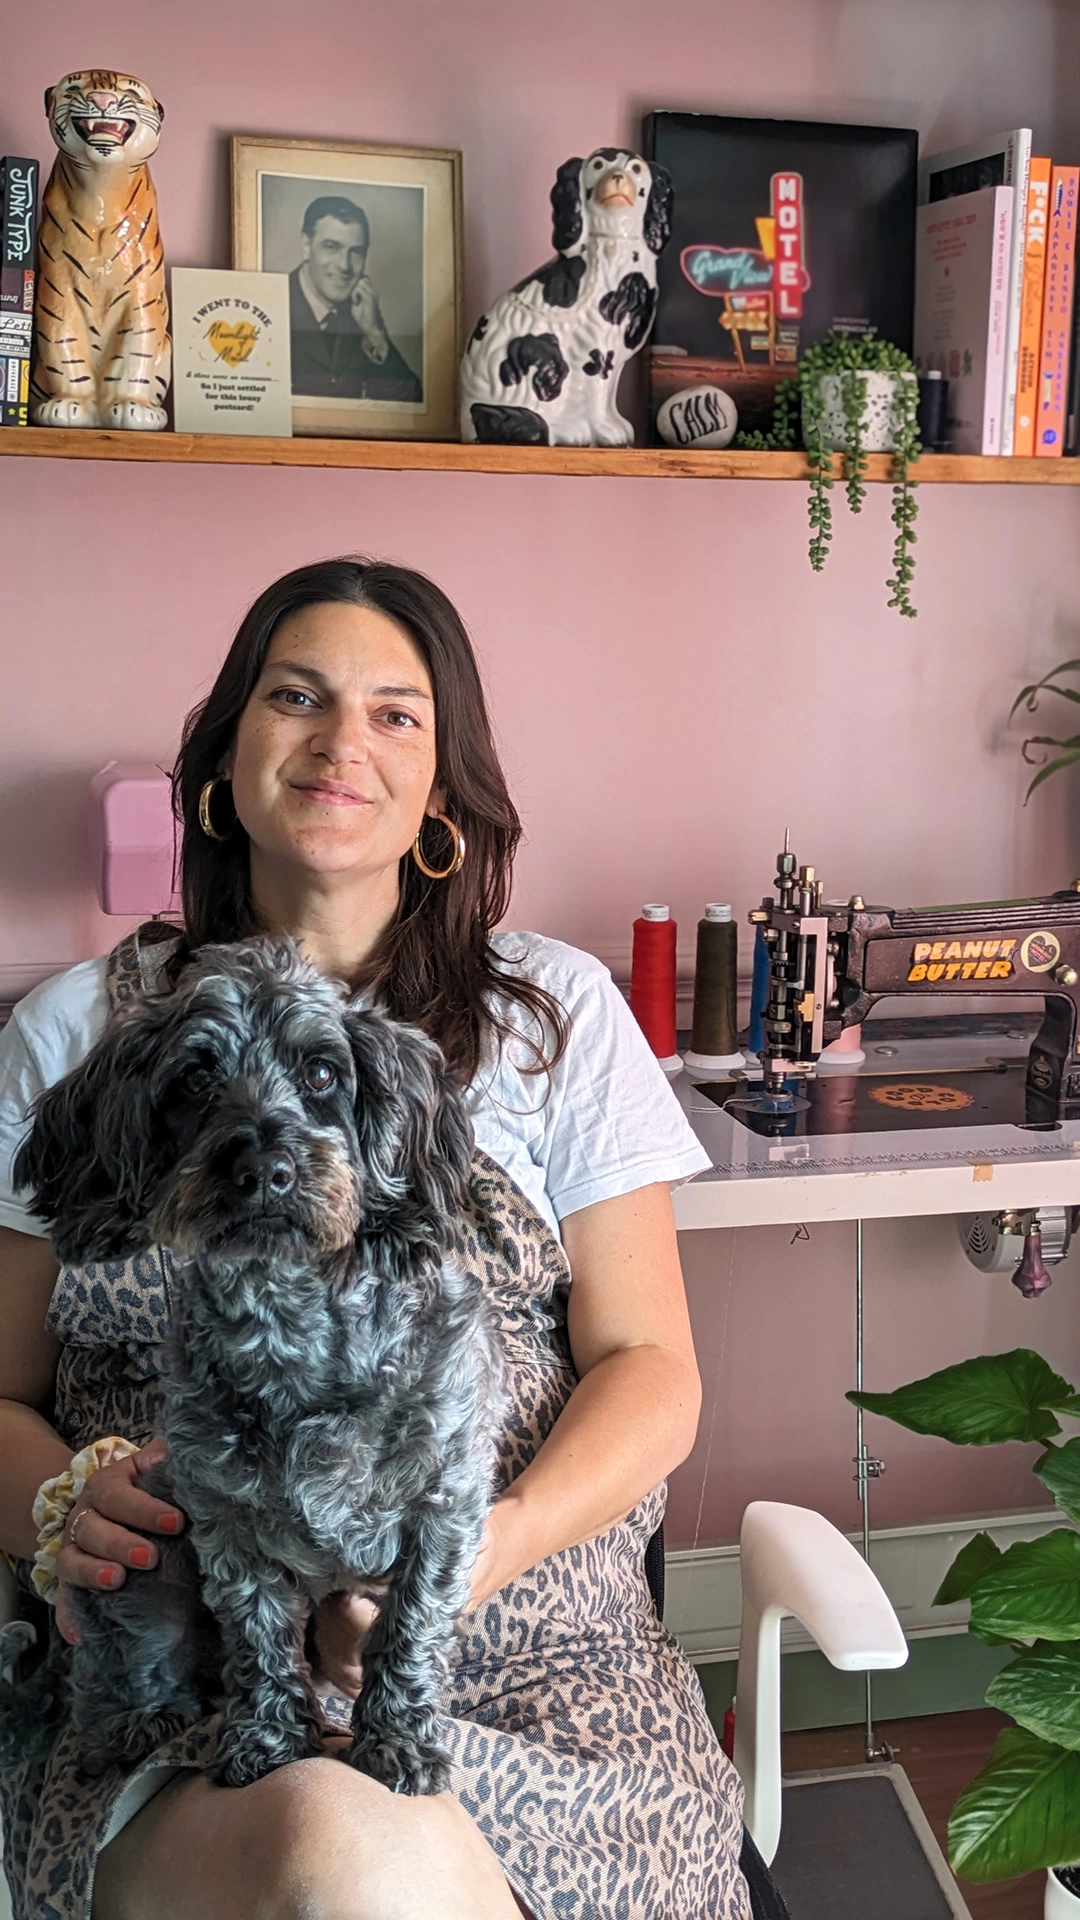 Woman in her studio workspace with Chainstitch Embroidery Machine and Dog sitting on her lap. Surrounded by books and plants and a pink background